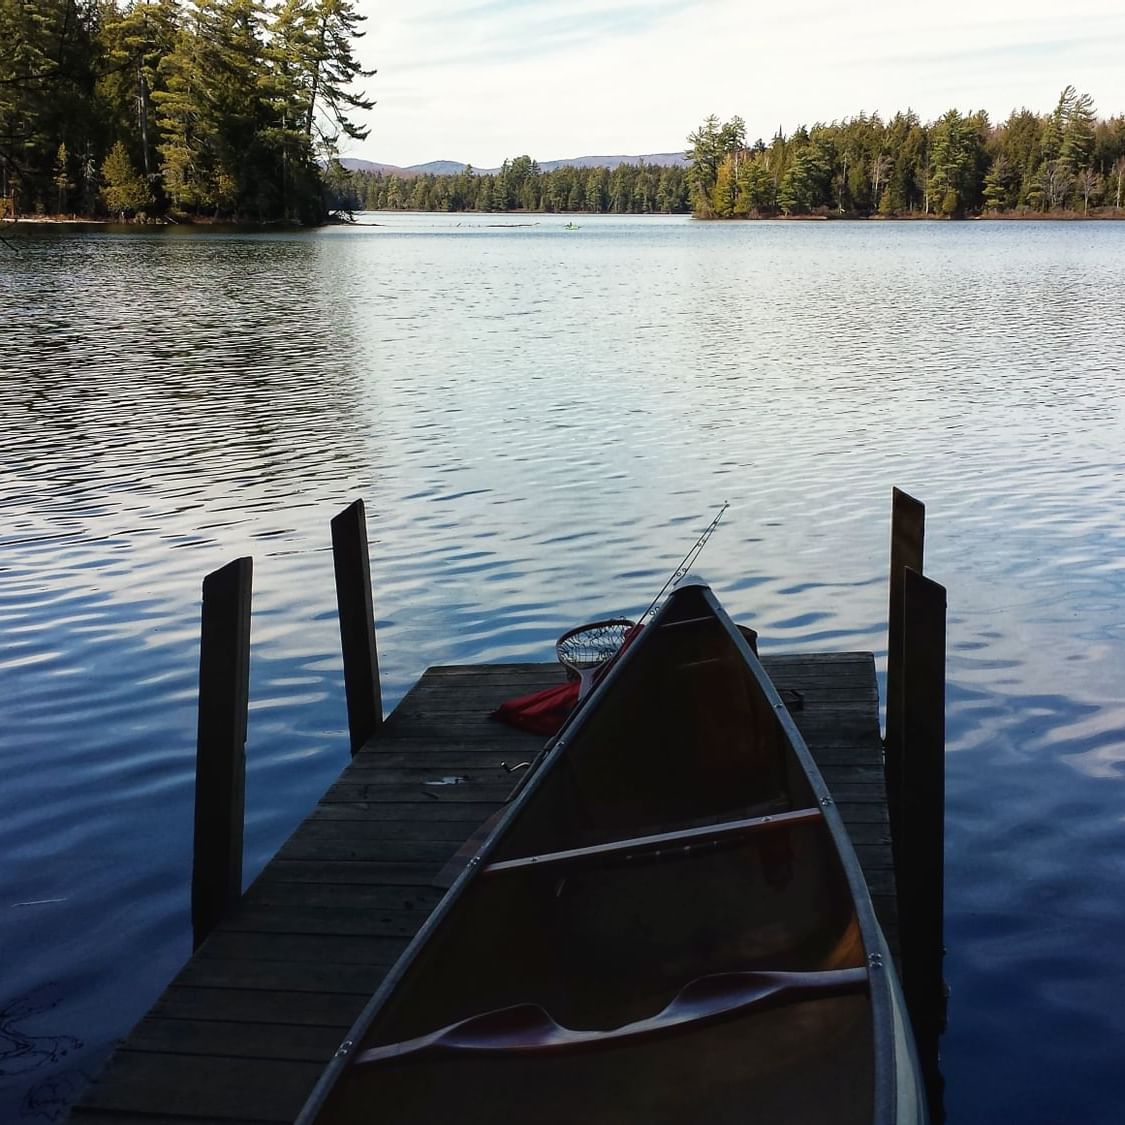 A canoe on the dock at Fallensby Clear Pond.